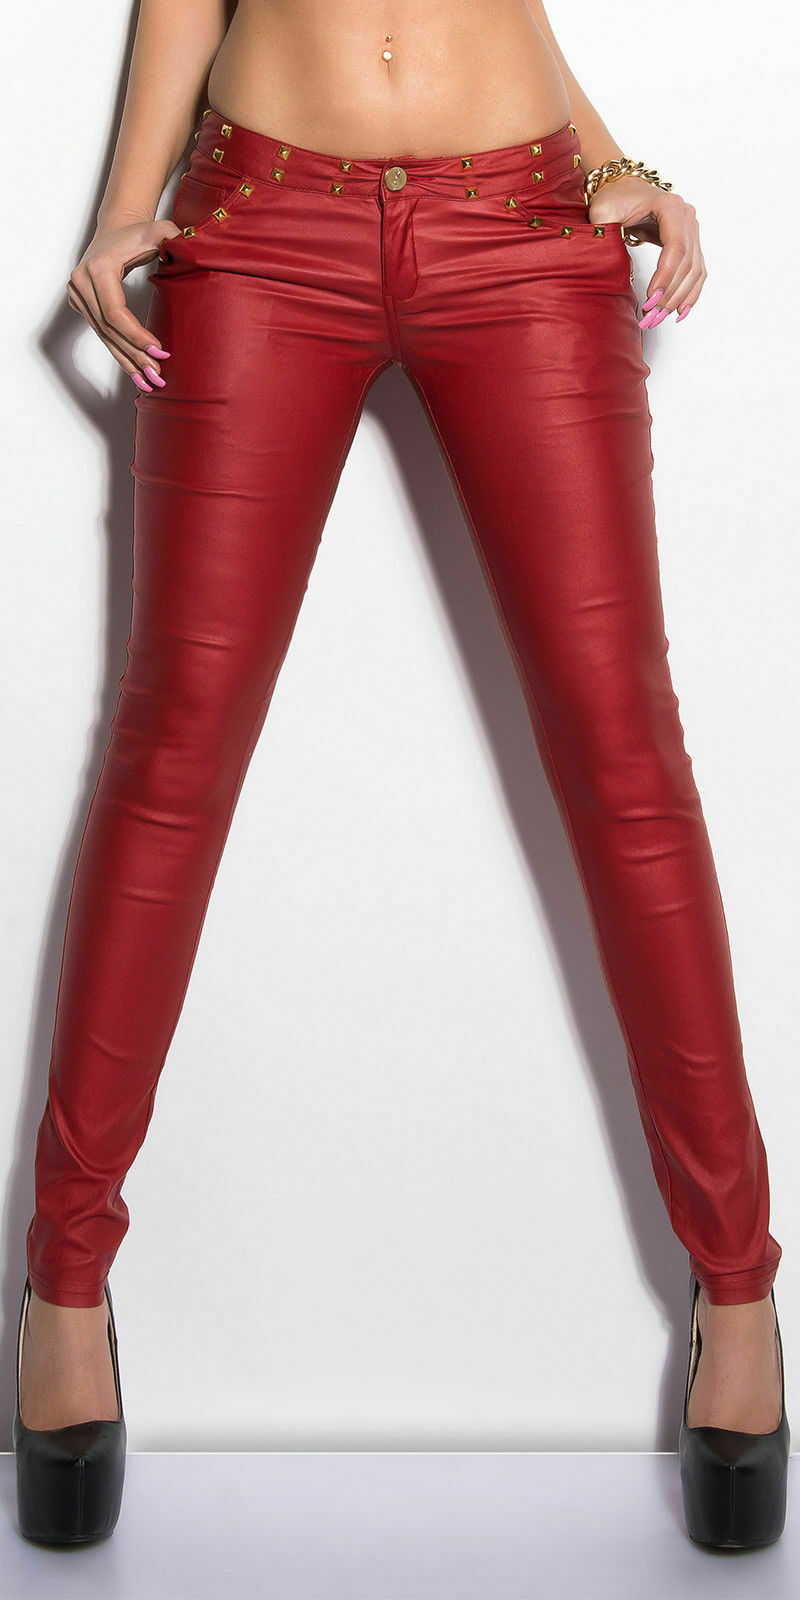 ladies red leather trousers